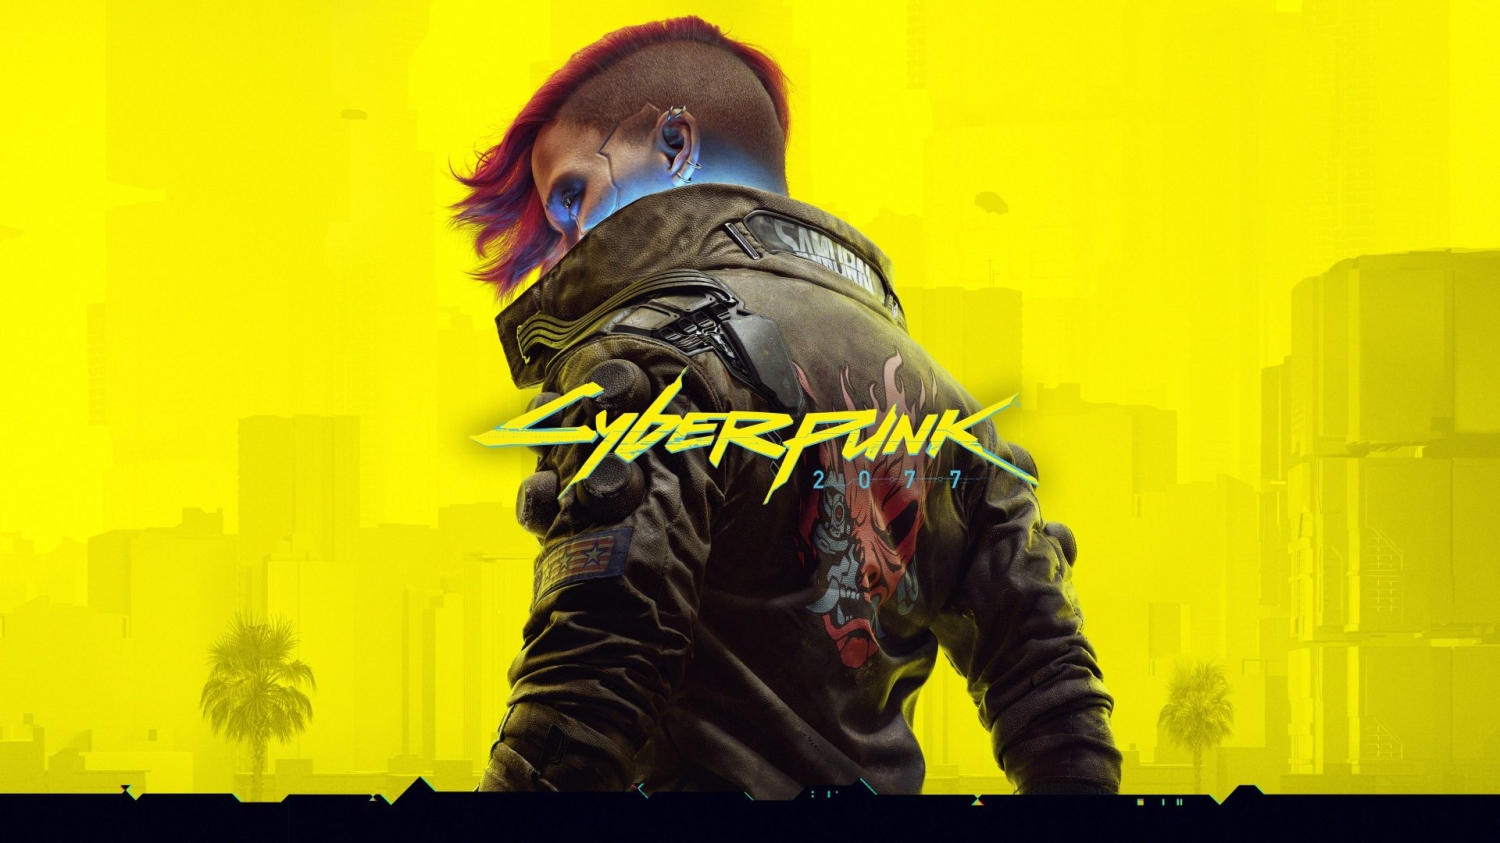 Cyberpunk 2077's must-have HD rework mod now works with Phantom Liberty  following a massive 2.0 update